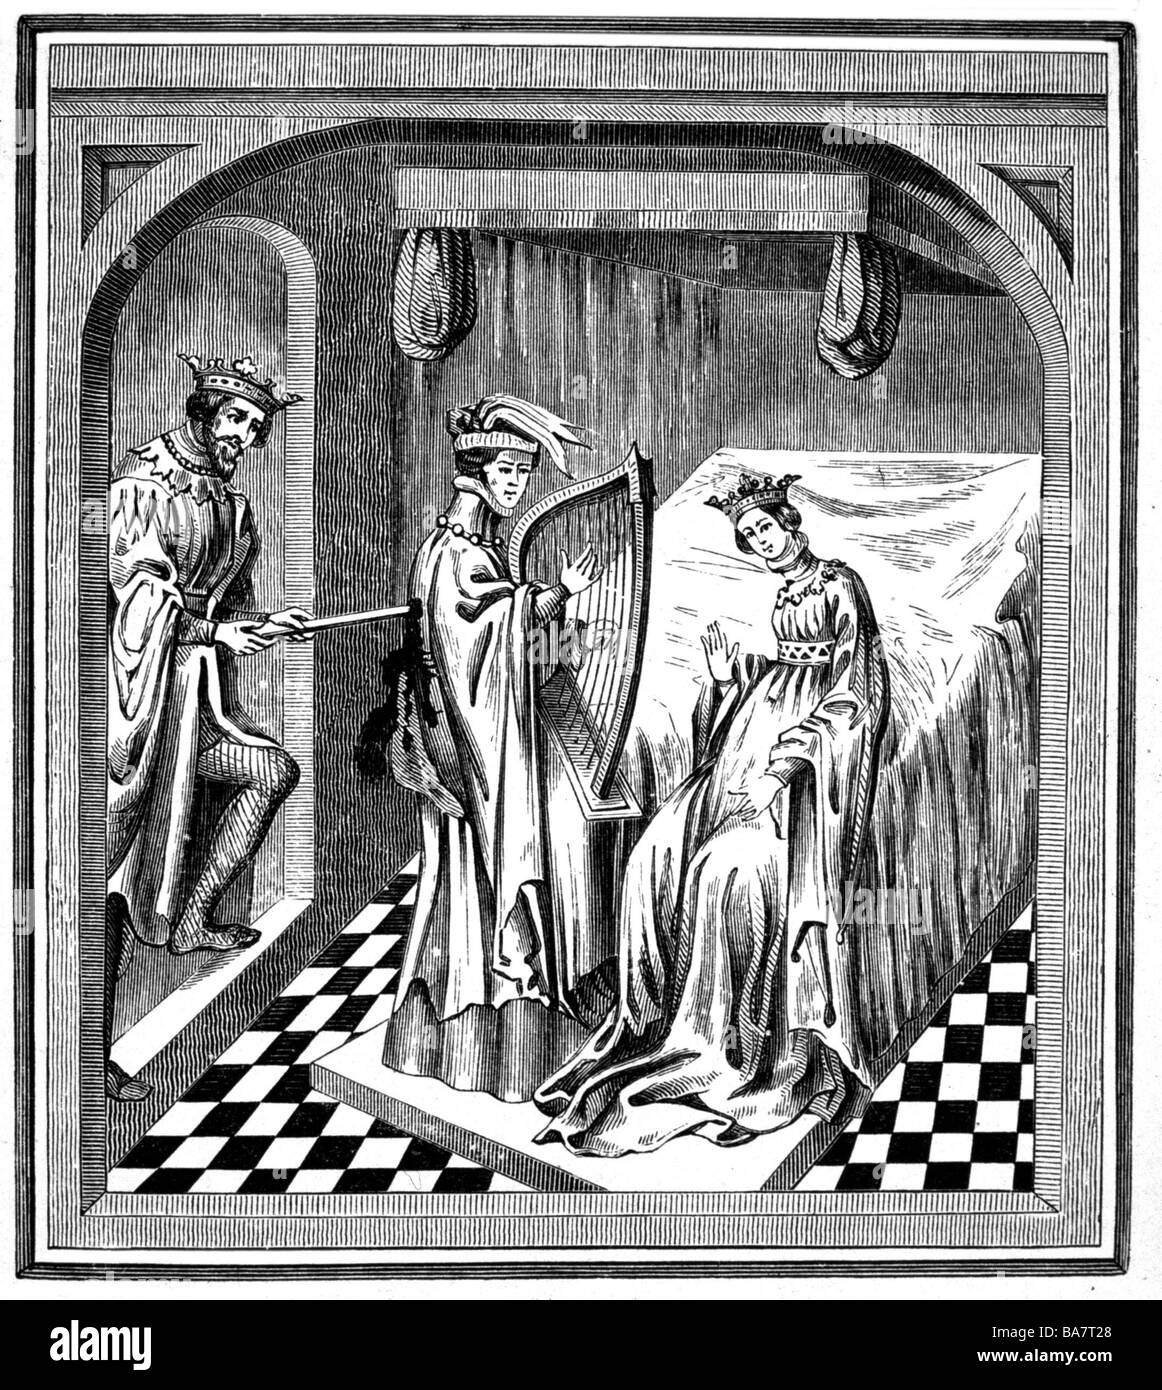 Tristan, mythical figure, scene, King Marke stabbing Tristan at Iseult's bed, wood engraving, 19th century, after miniature, 15th century, Stock Photo